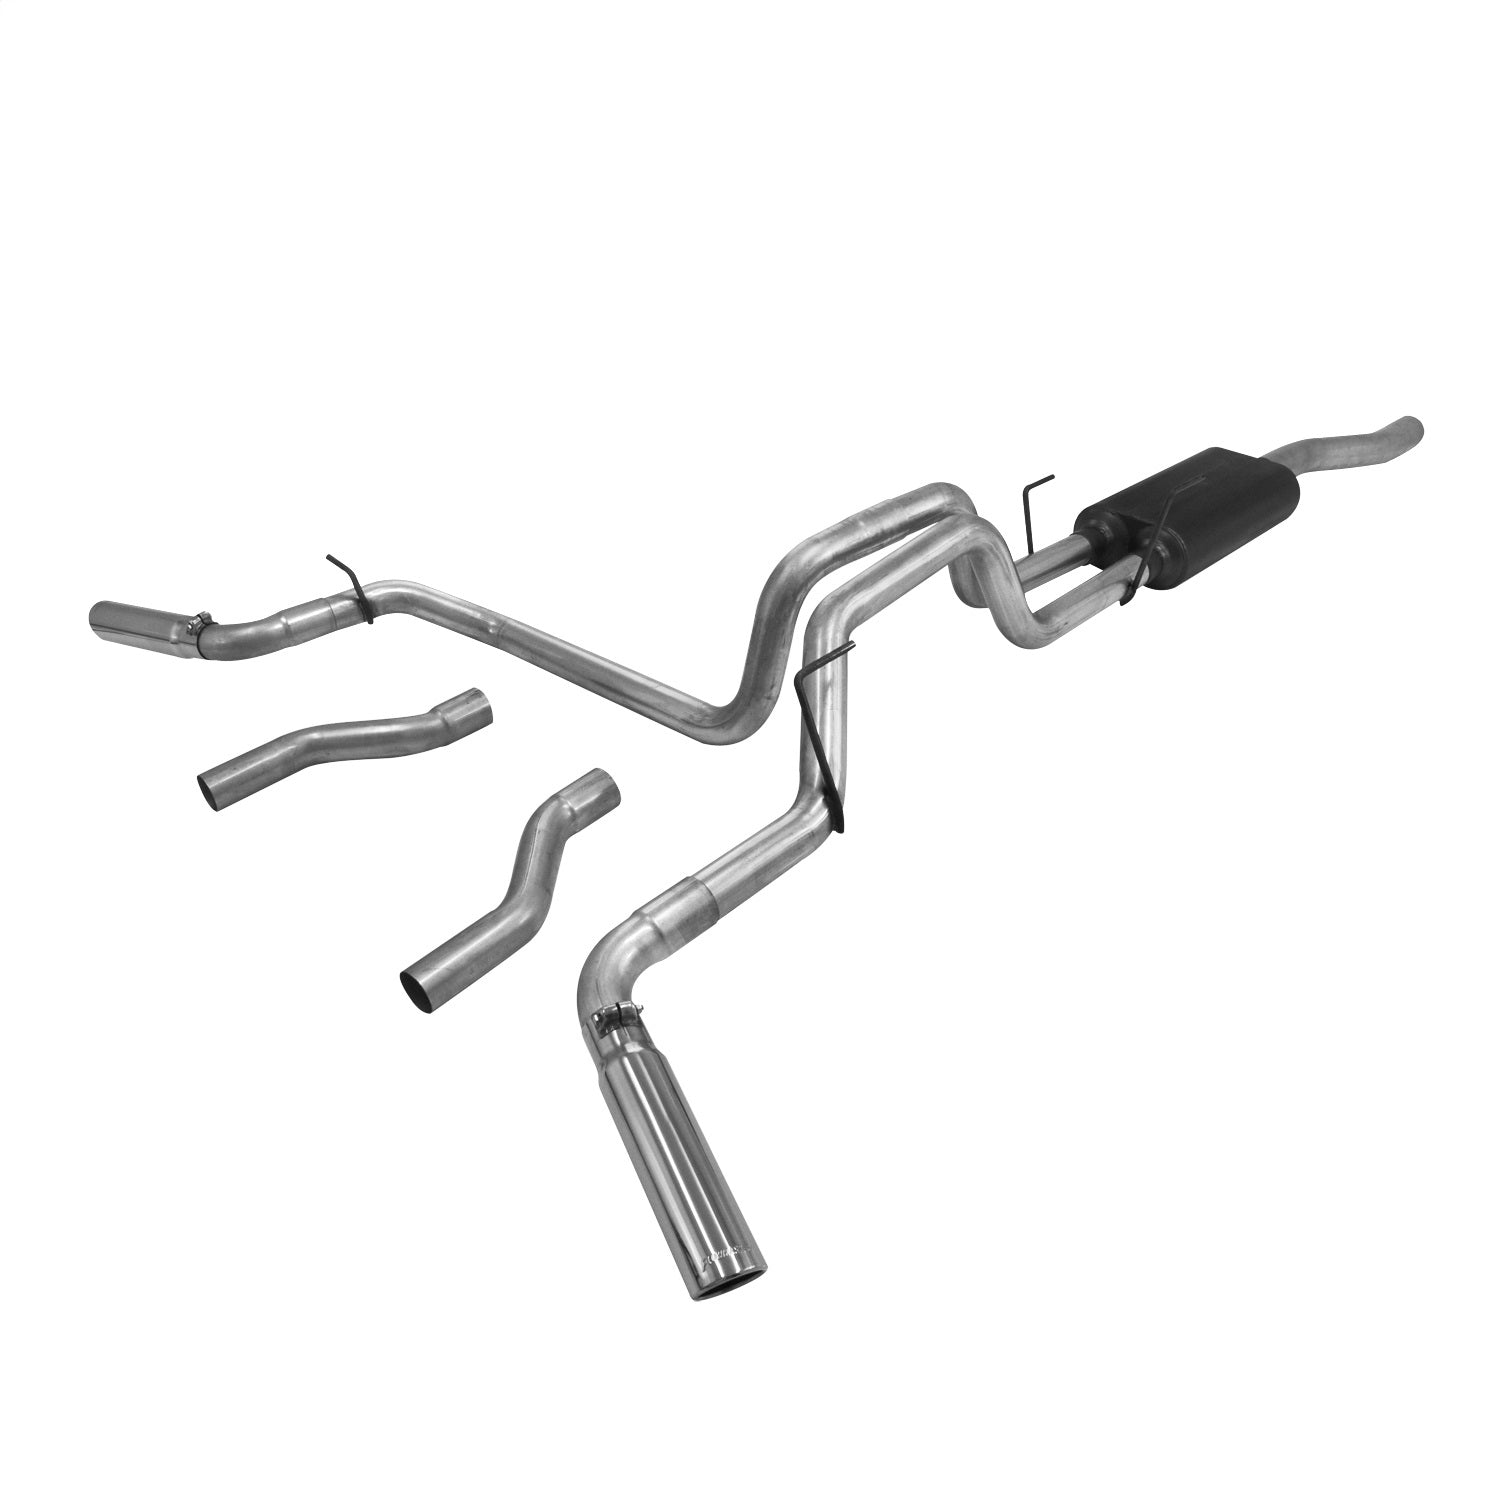 Flowmaster 817507 American Thunder Cat Back Exhaust System